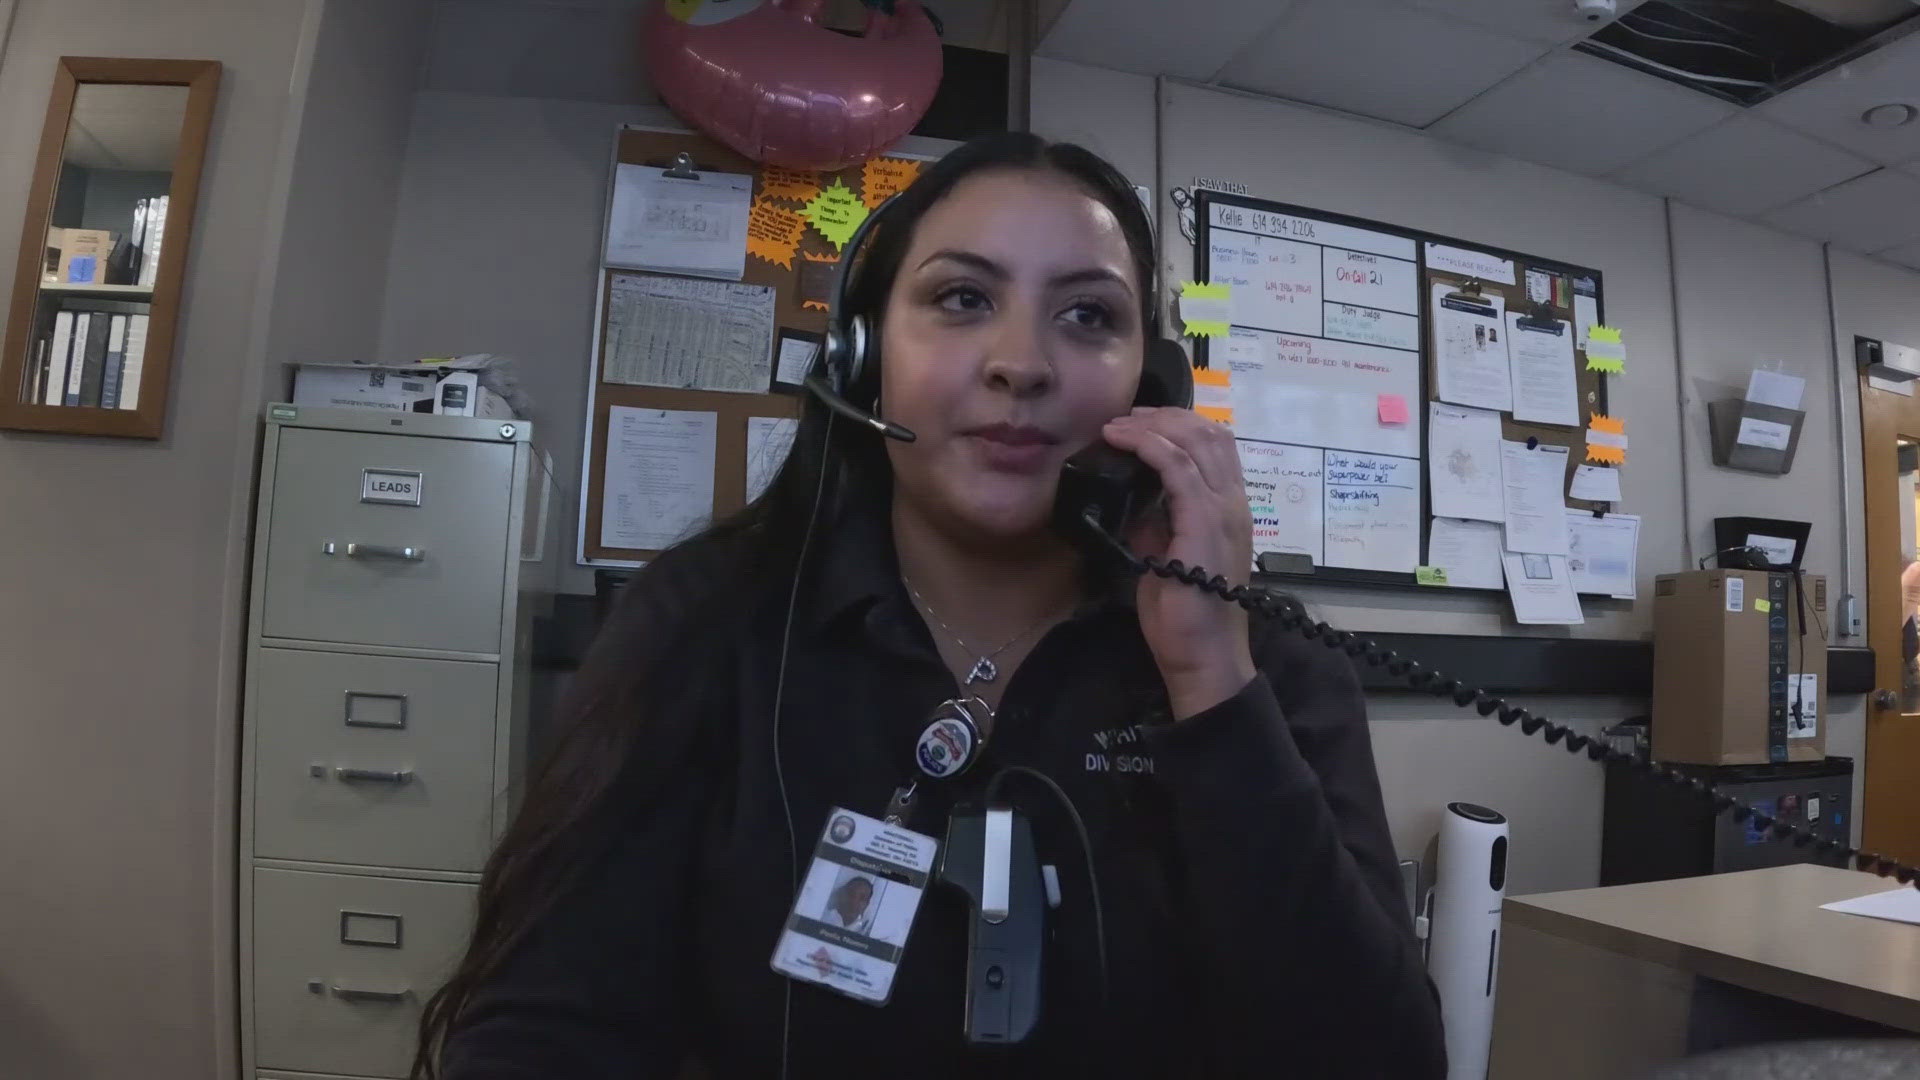 When she heard that she was the first bilingual dispatcher in the department, Perla Nunez said she was shocked.